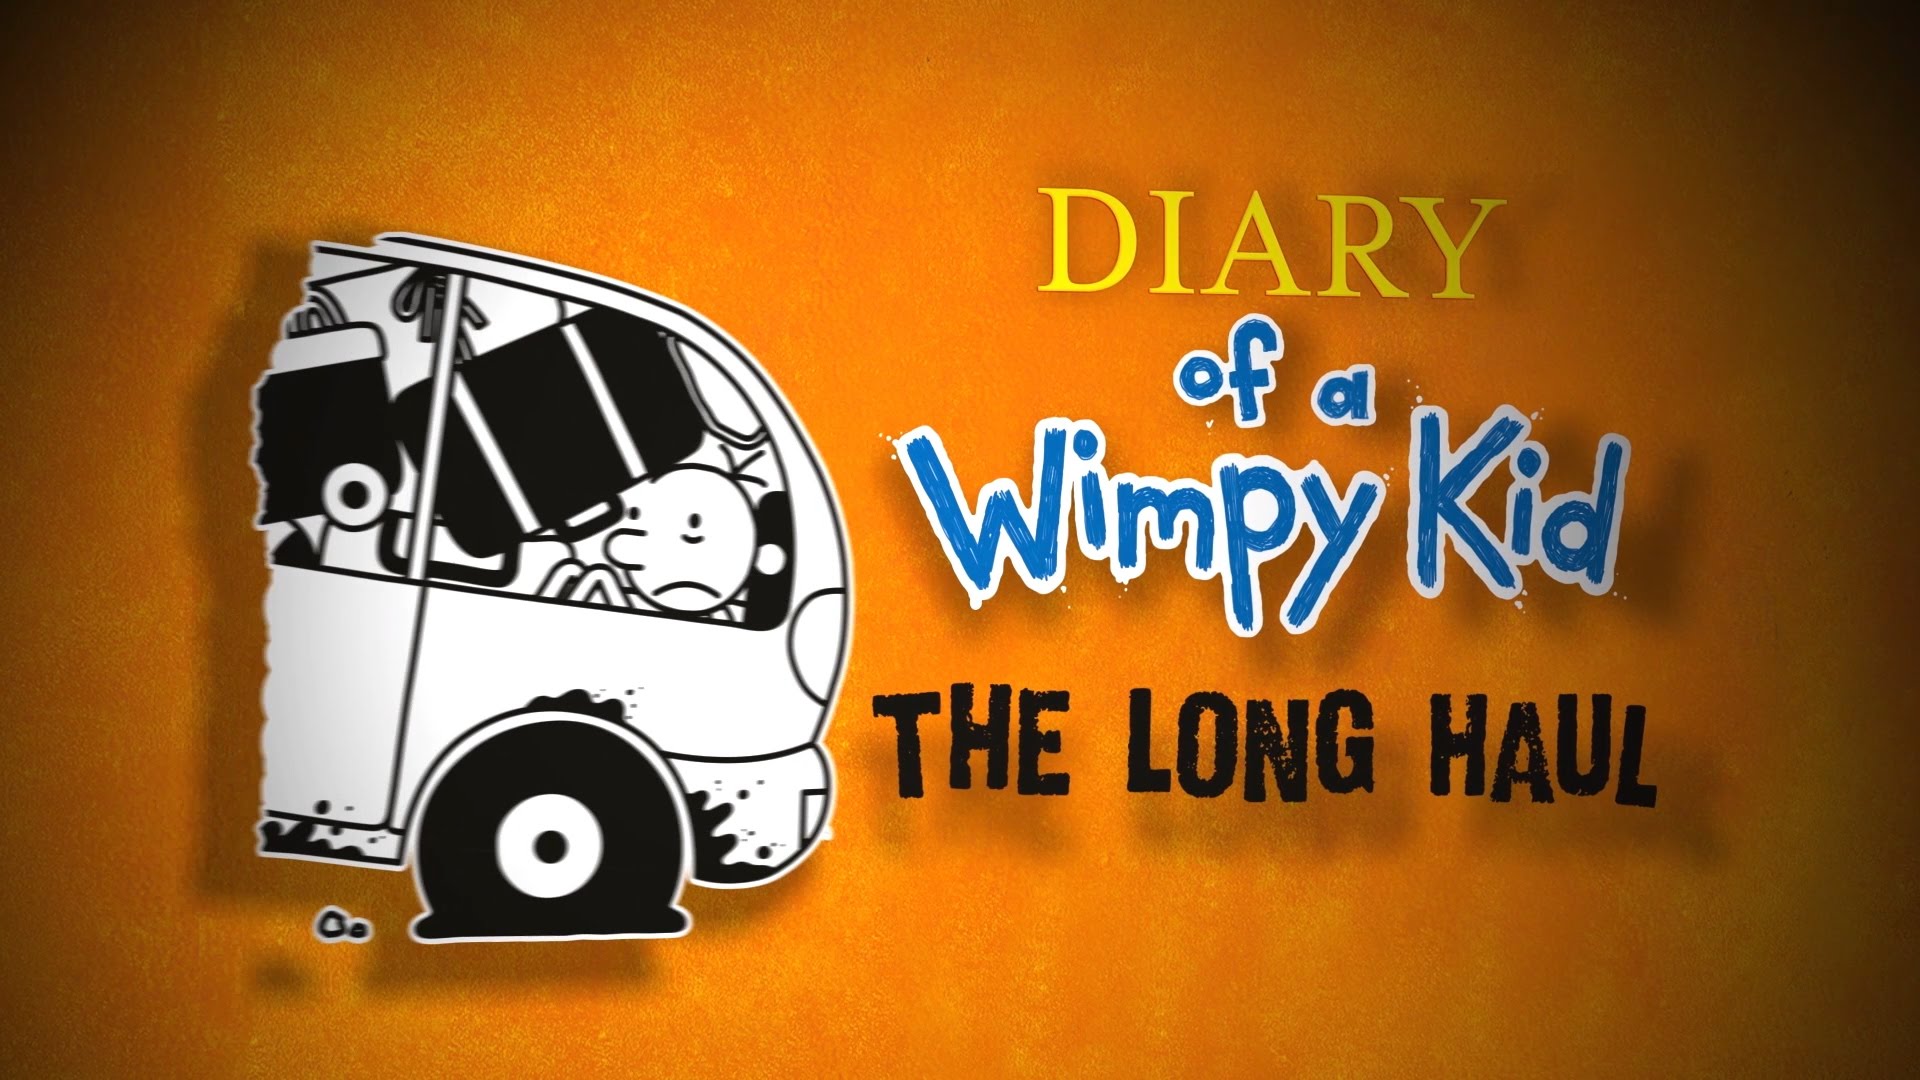 Diary of a Wimpy Kid 2 Looking for Boys